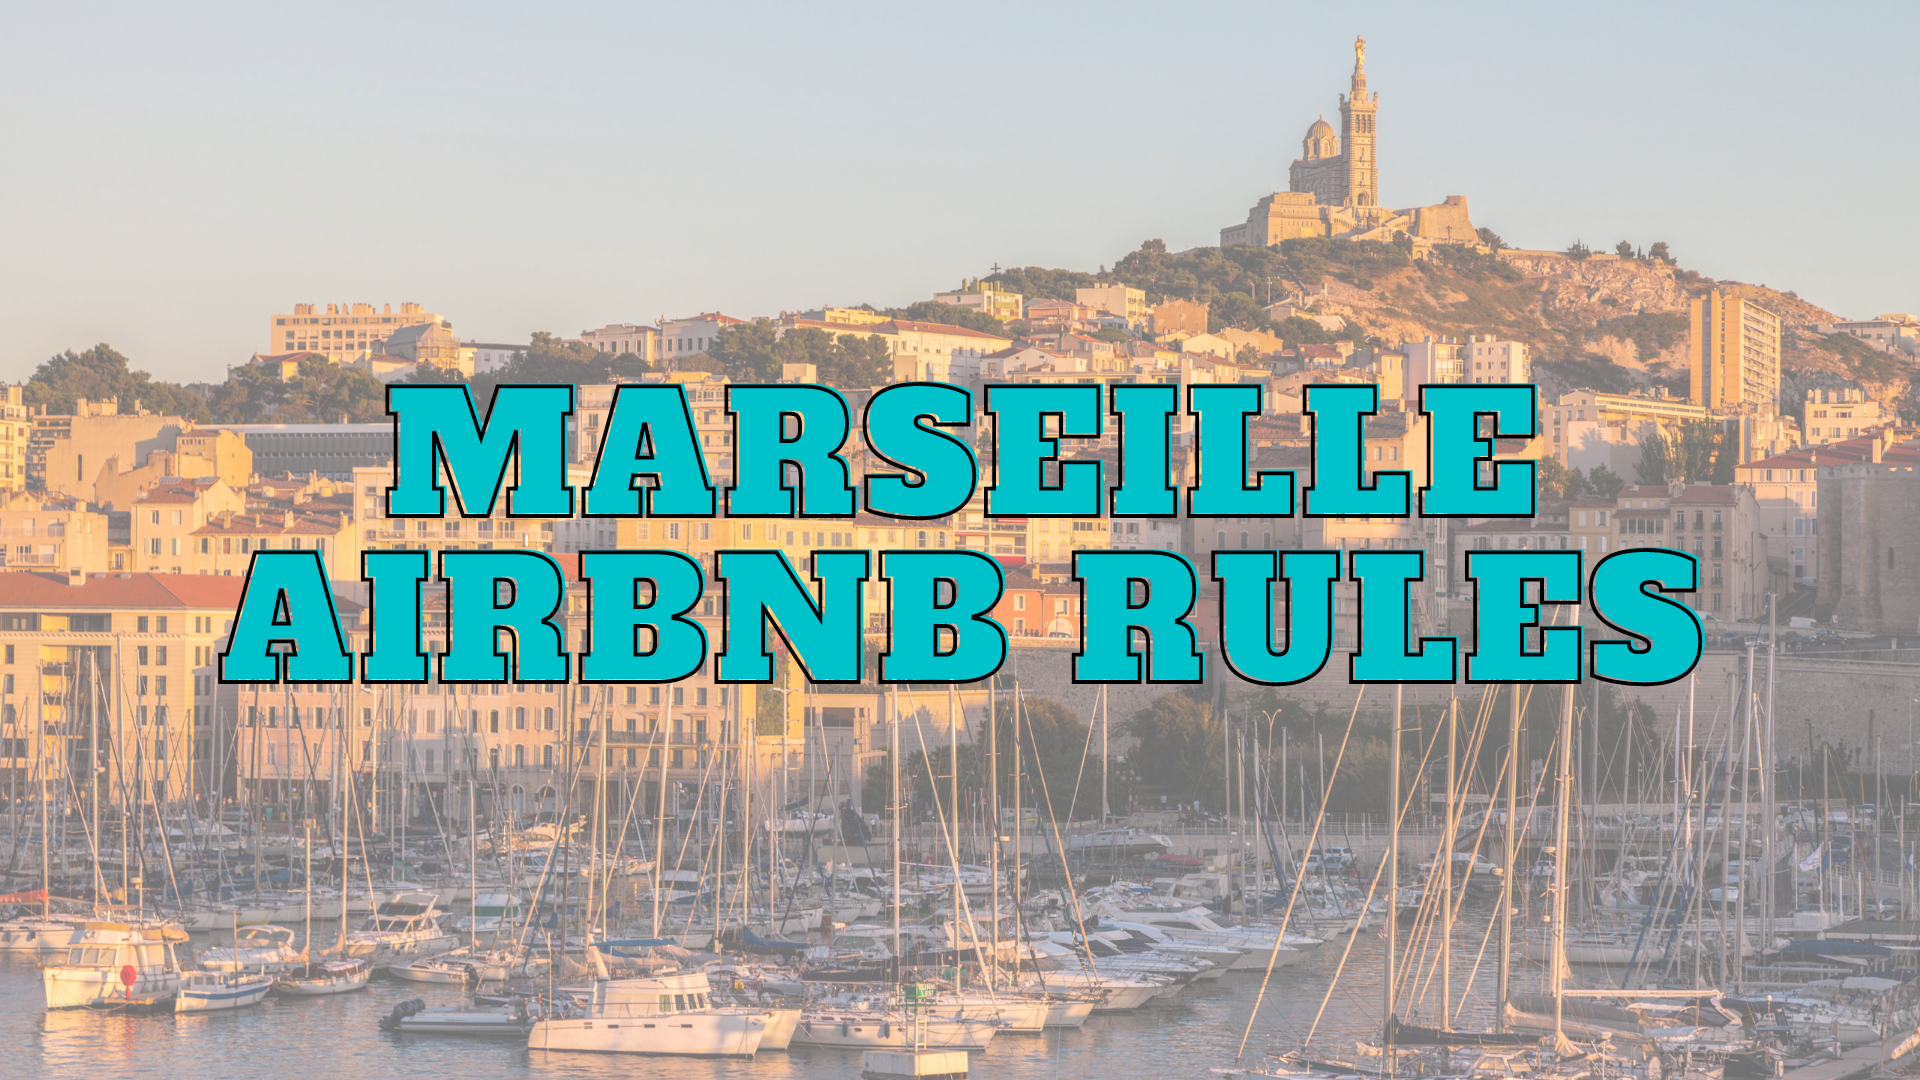 Marseille Airbnb Rules